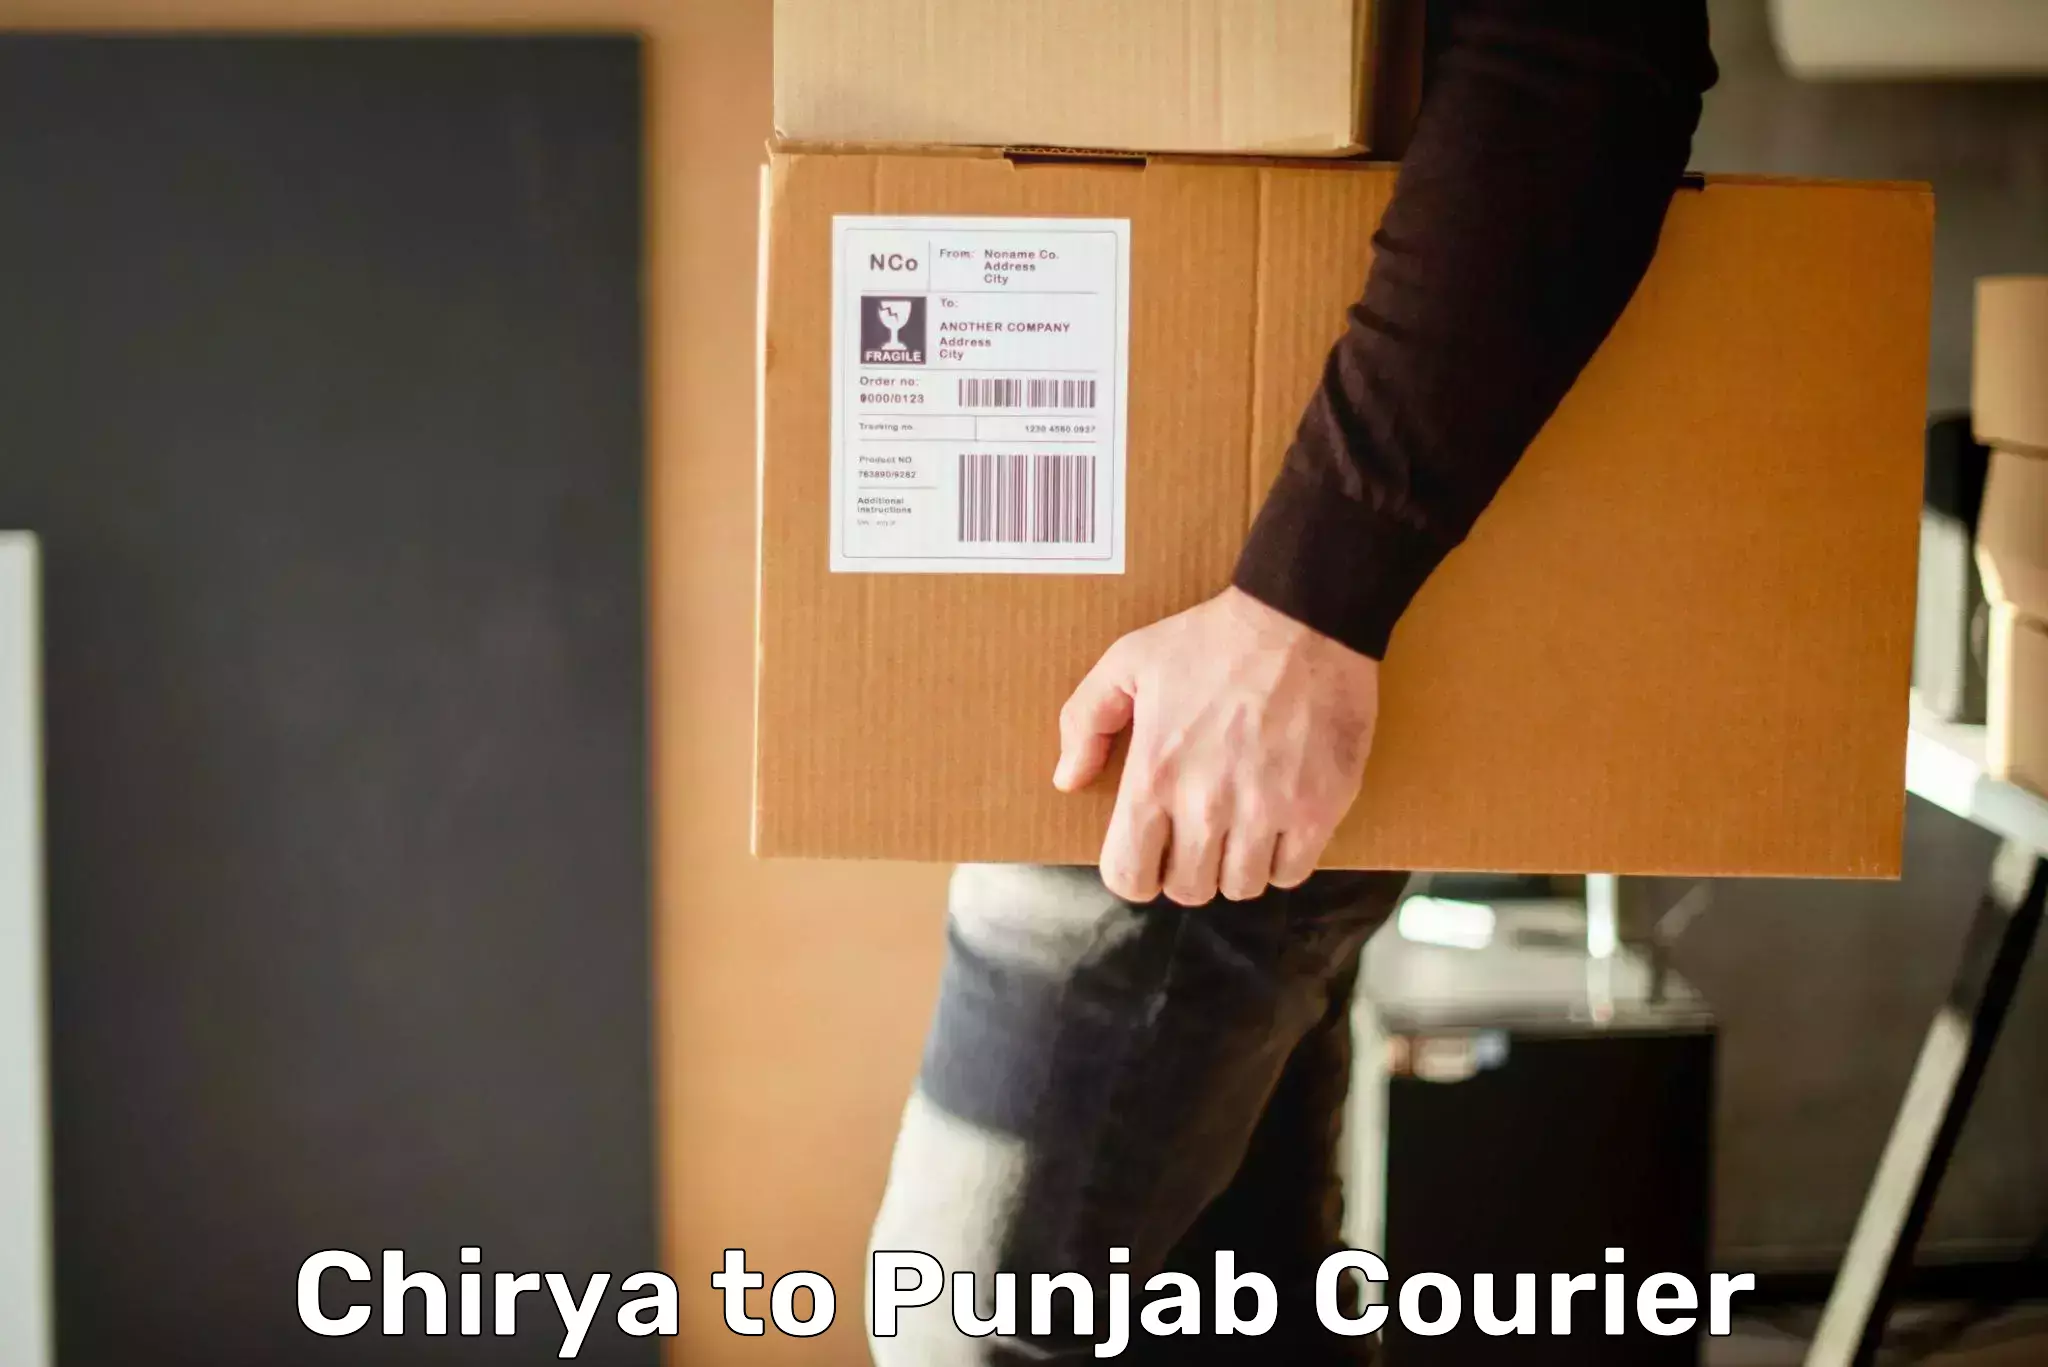 Overnight delivery services Chirya to Punjab